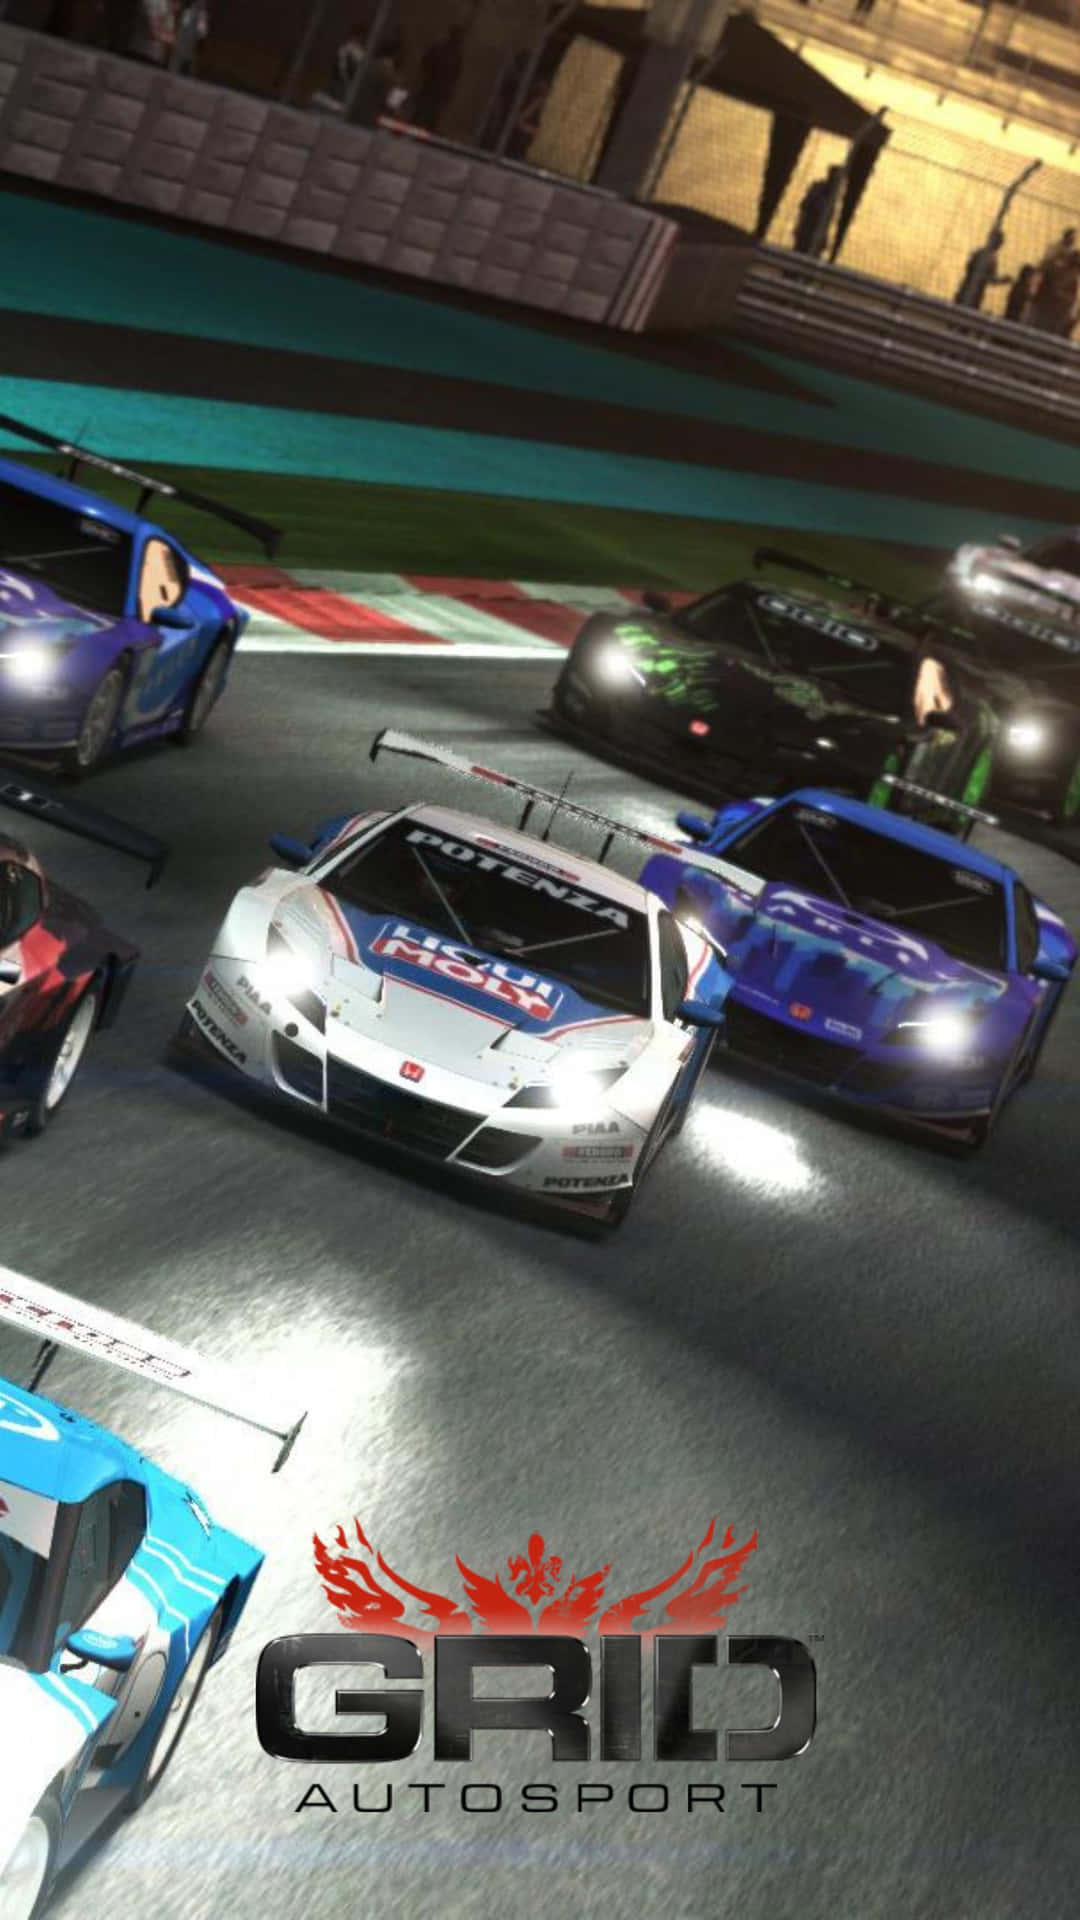 "Hit the tracks with Android Grid Autosport for hours of immersive and captivating driving madness!"